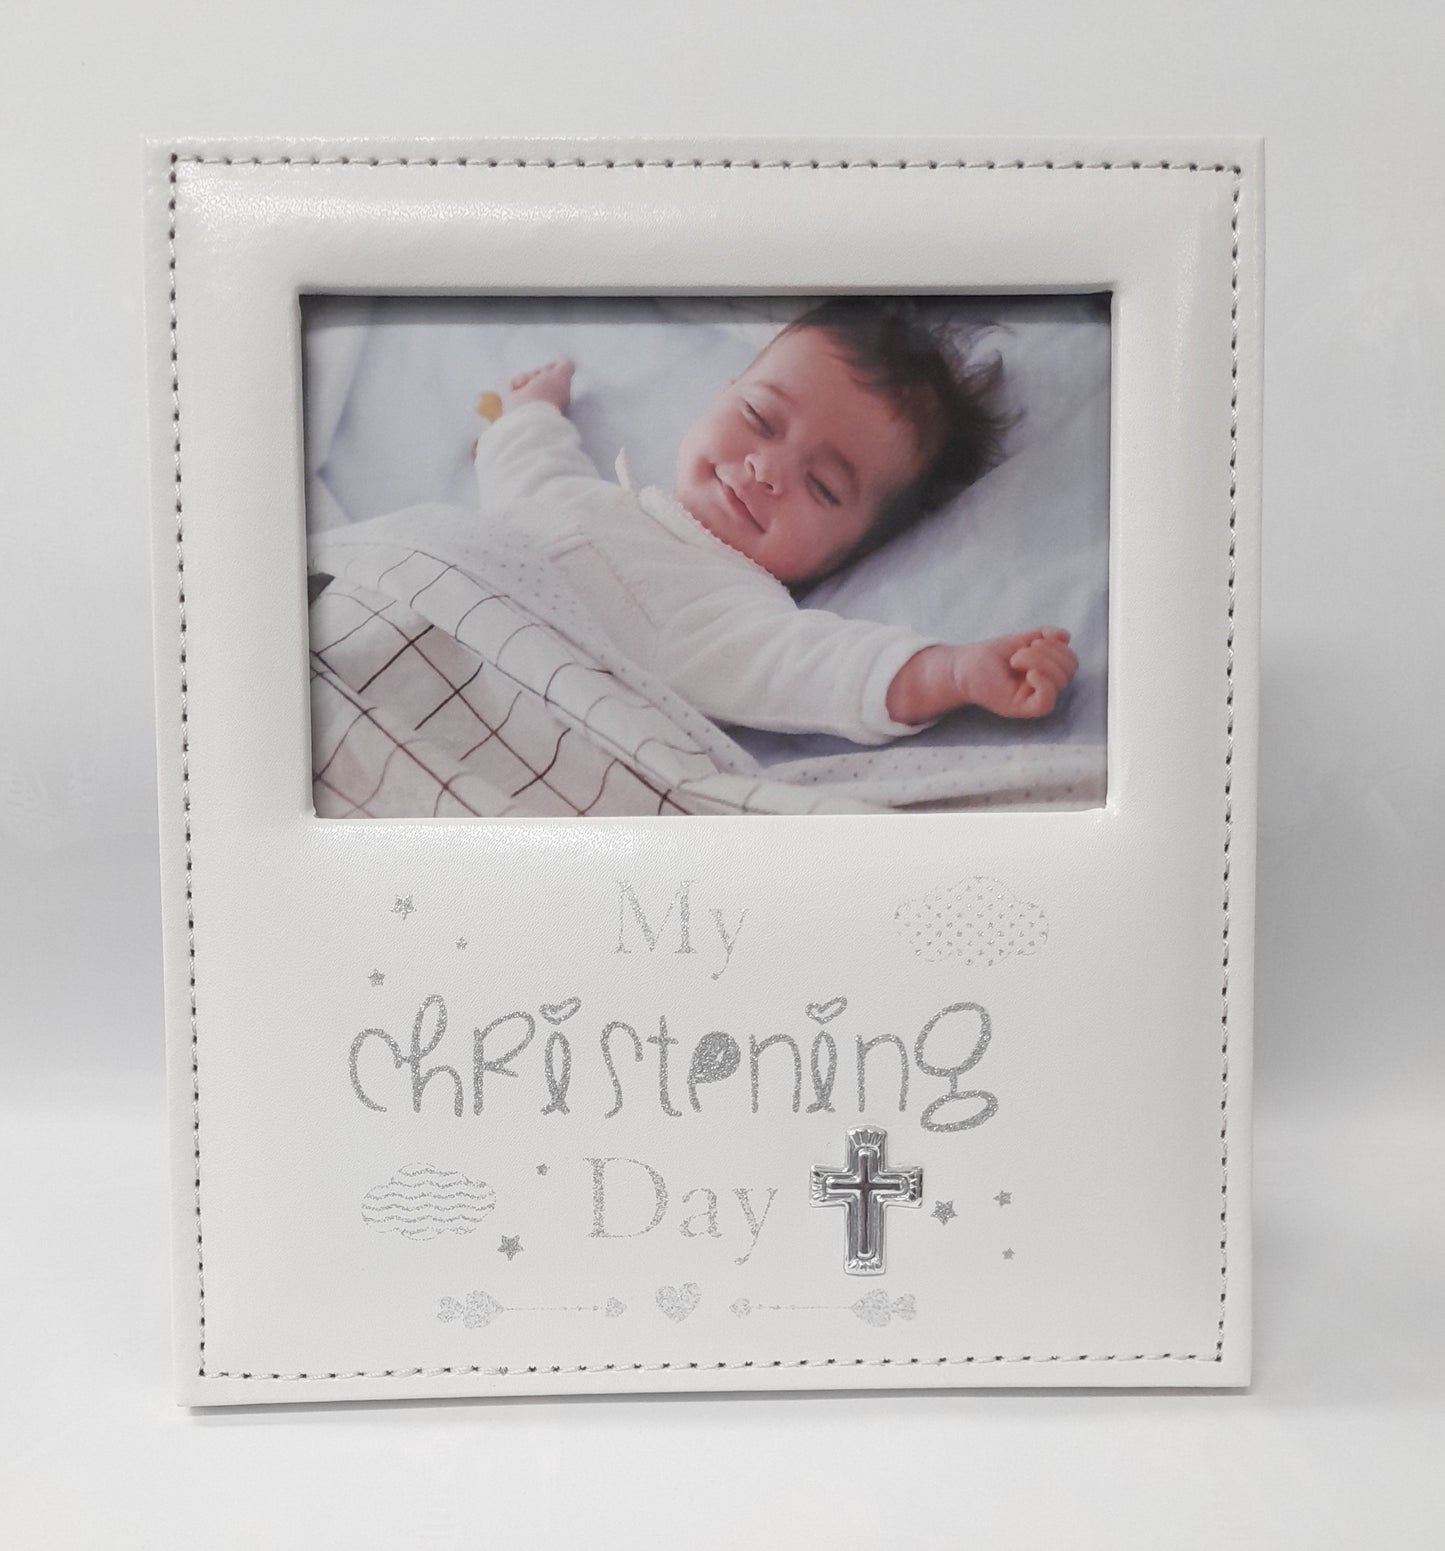 My Christening Day - White with silver Photo Frame